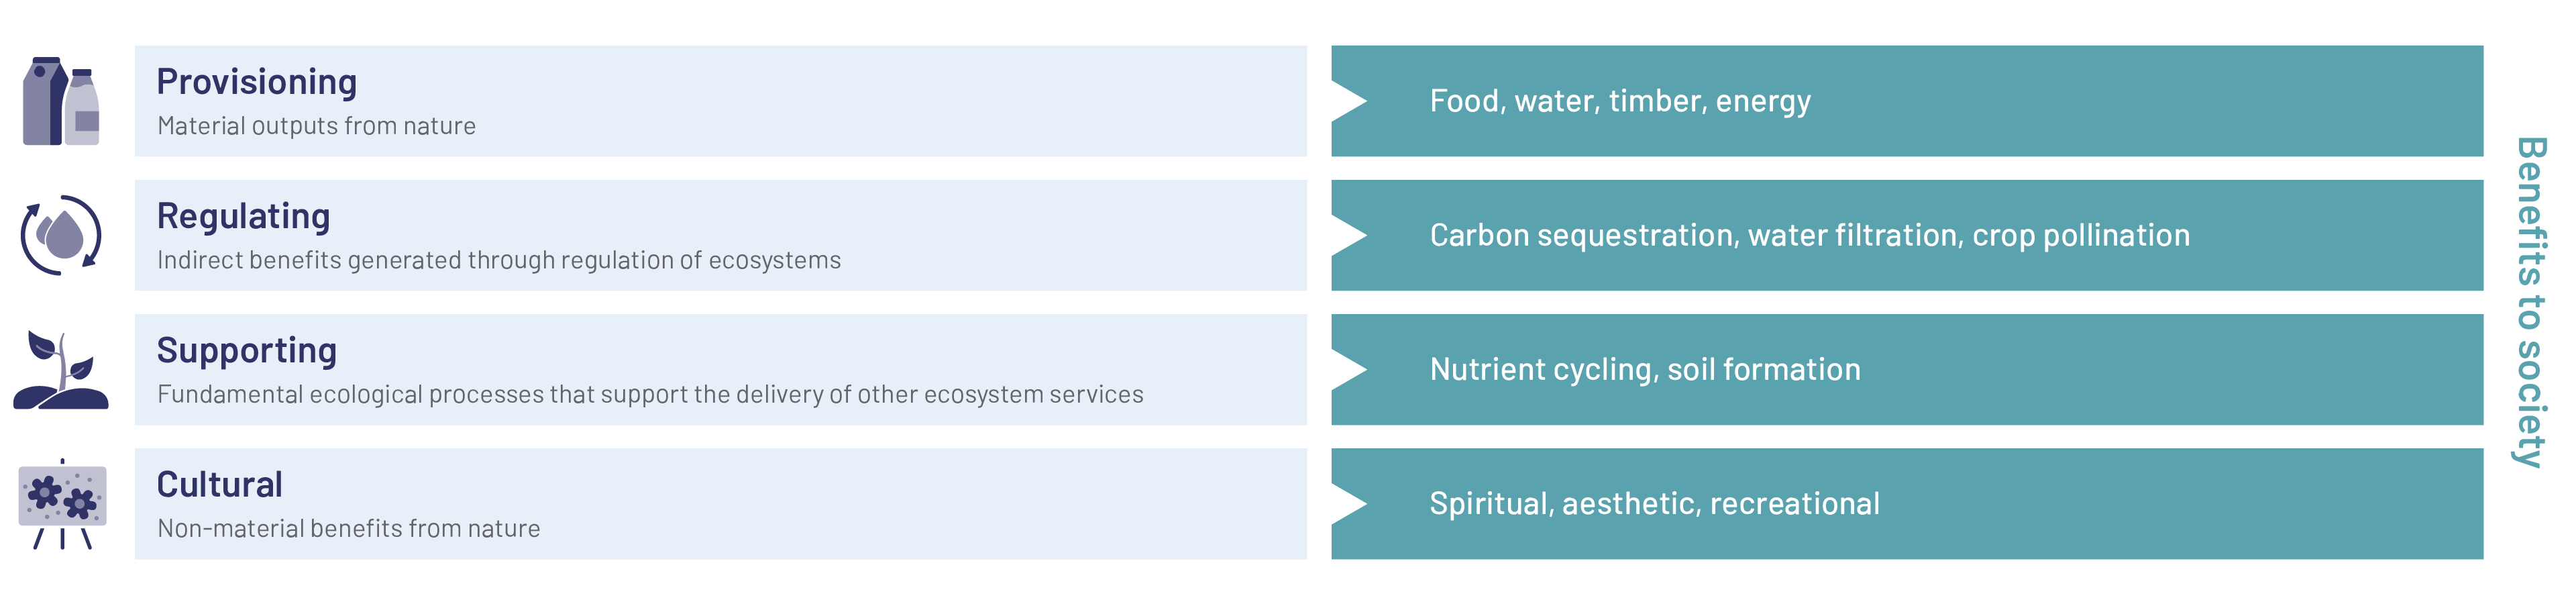 breaking down composition of natural capital